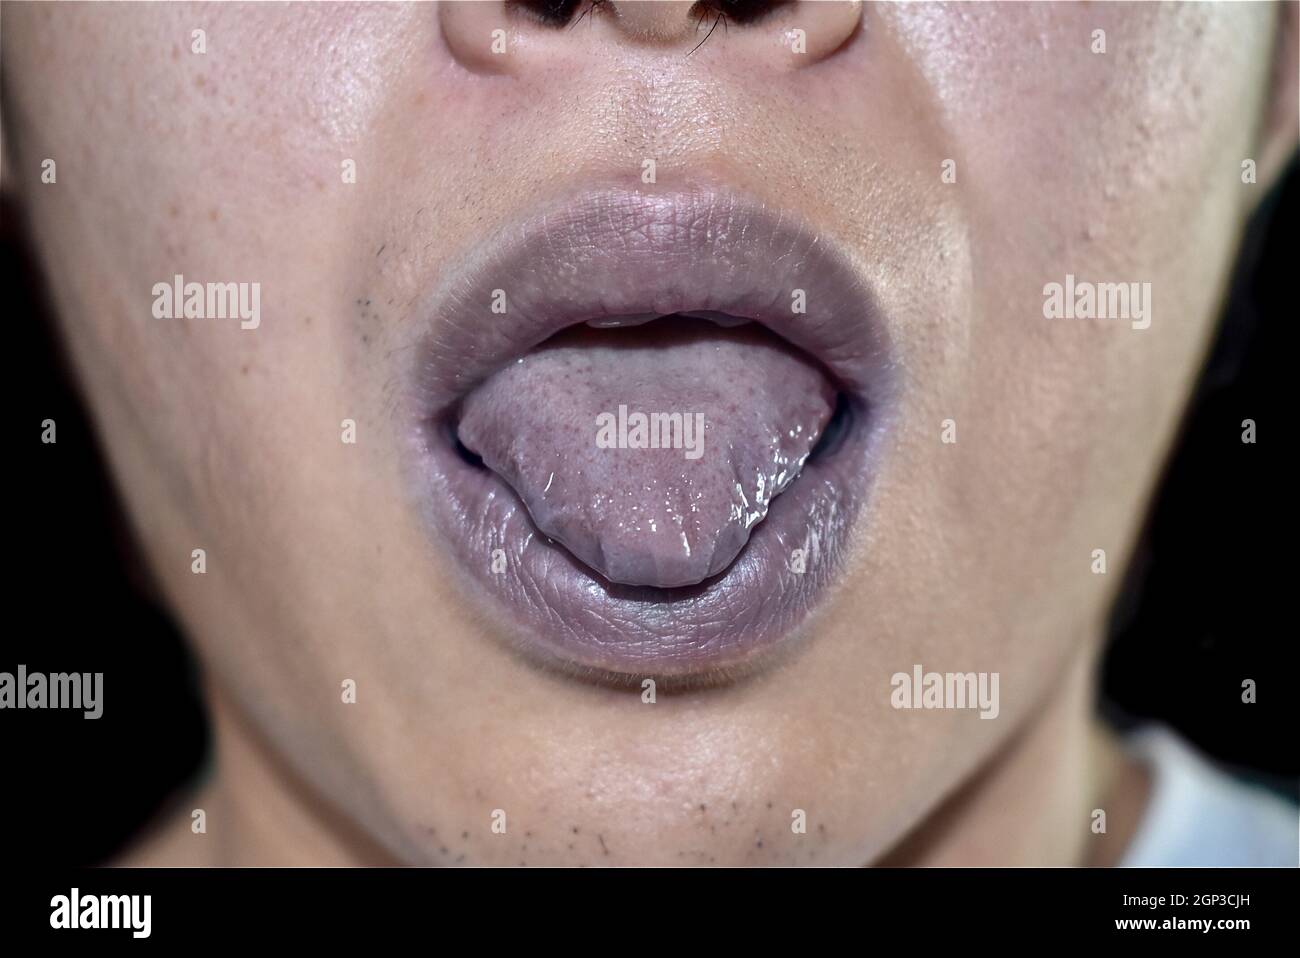 Cyanotic lips or central cyanosis at Southeast Asian young man with congenital heart disease. Stock Photo